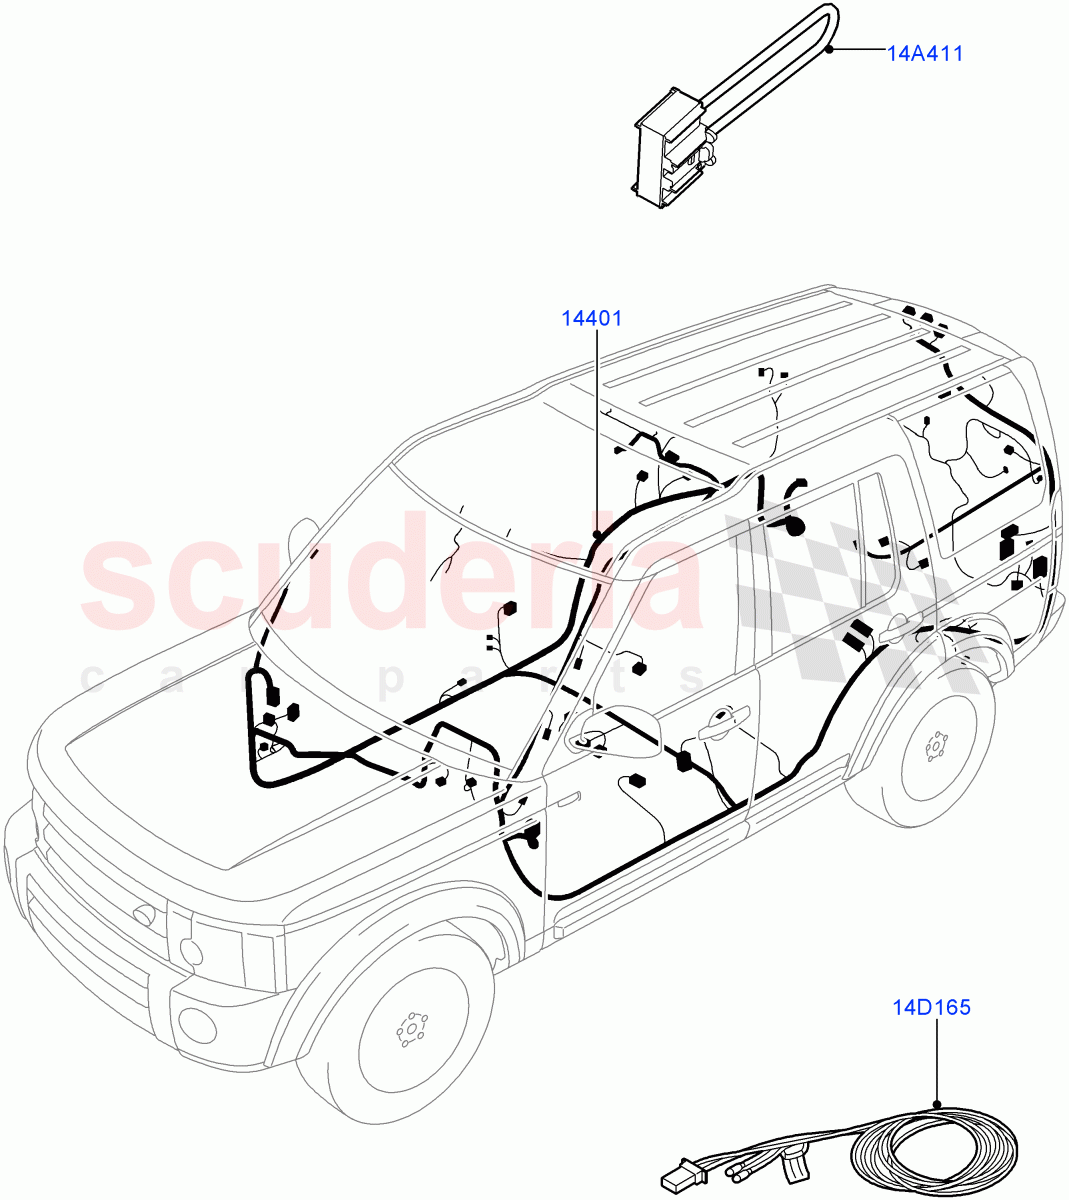 Electrical Wiring - Engine And Dash(Main Harness)((V)FROMAA000001,(V)TOAA999999) of Land Rover Land Rover Discovery 4 (2010-2016) [3.0 Diesel 24V DOHC TC]